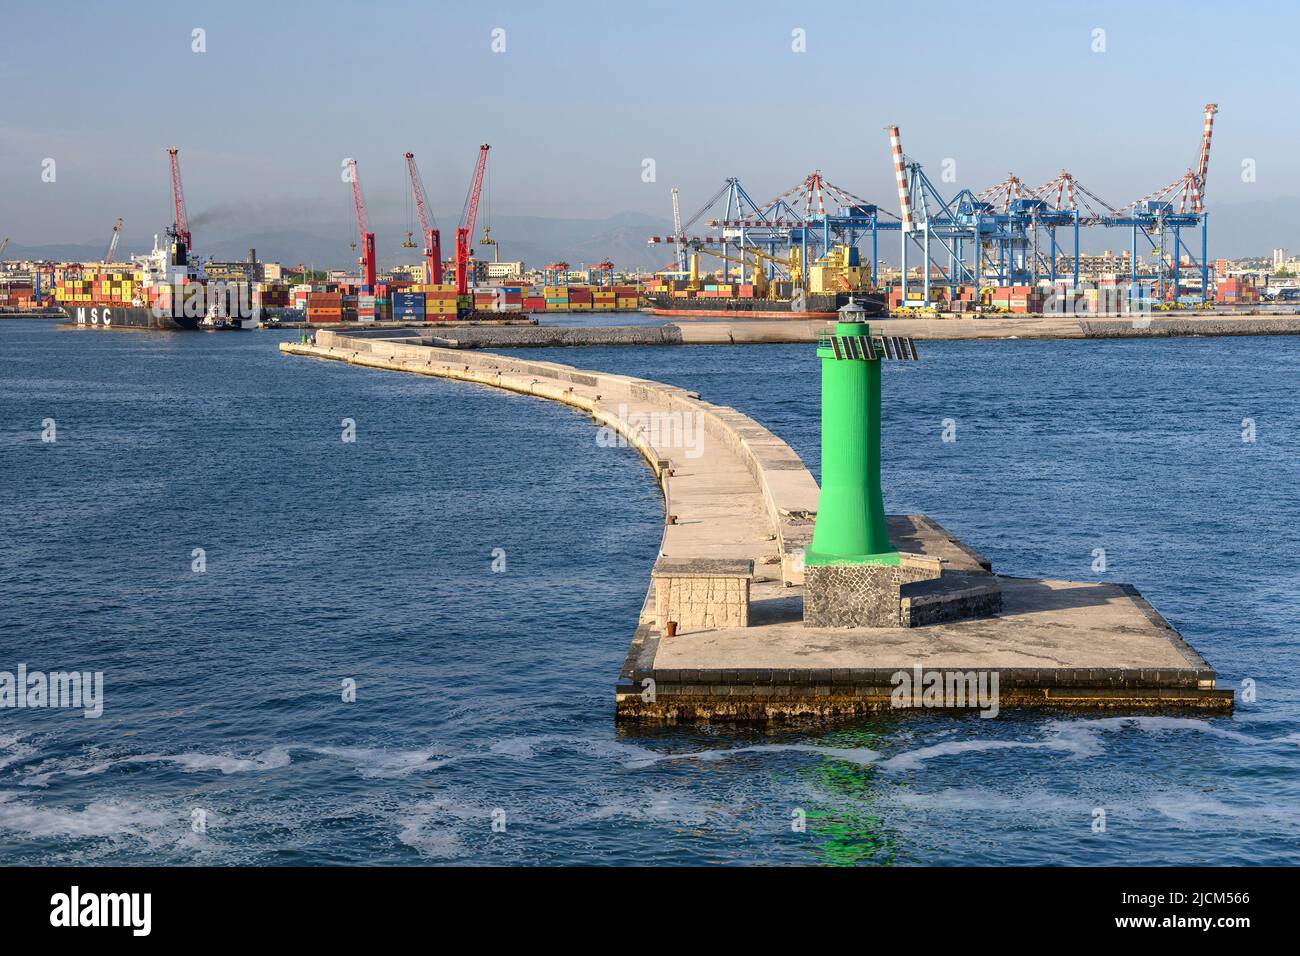 The inner break wall at the port of Naples anchors a colorful scene. Stock Photo